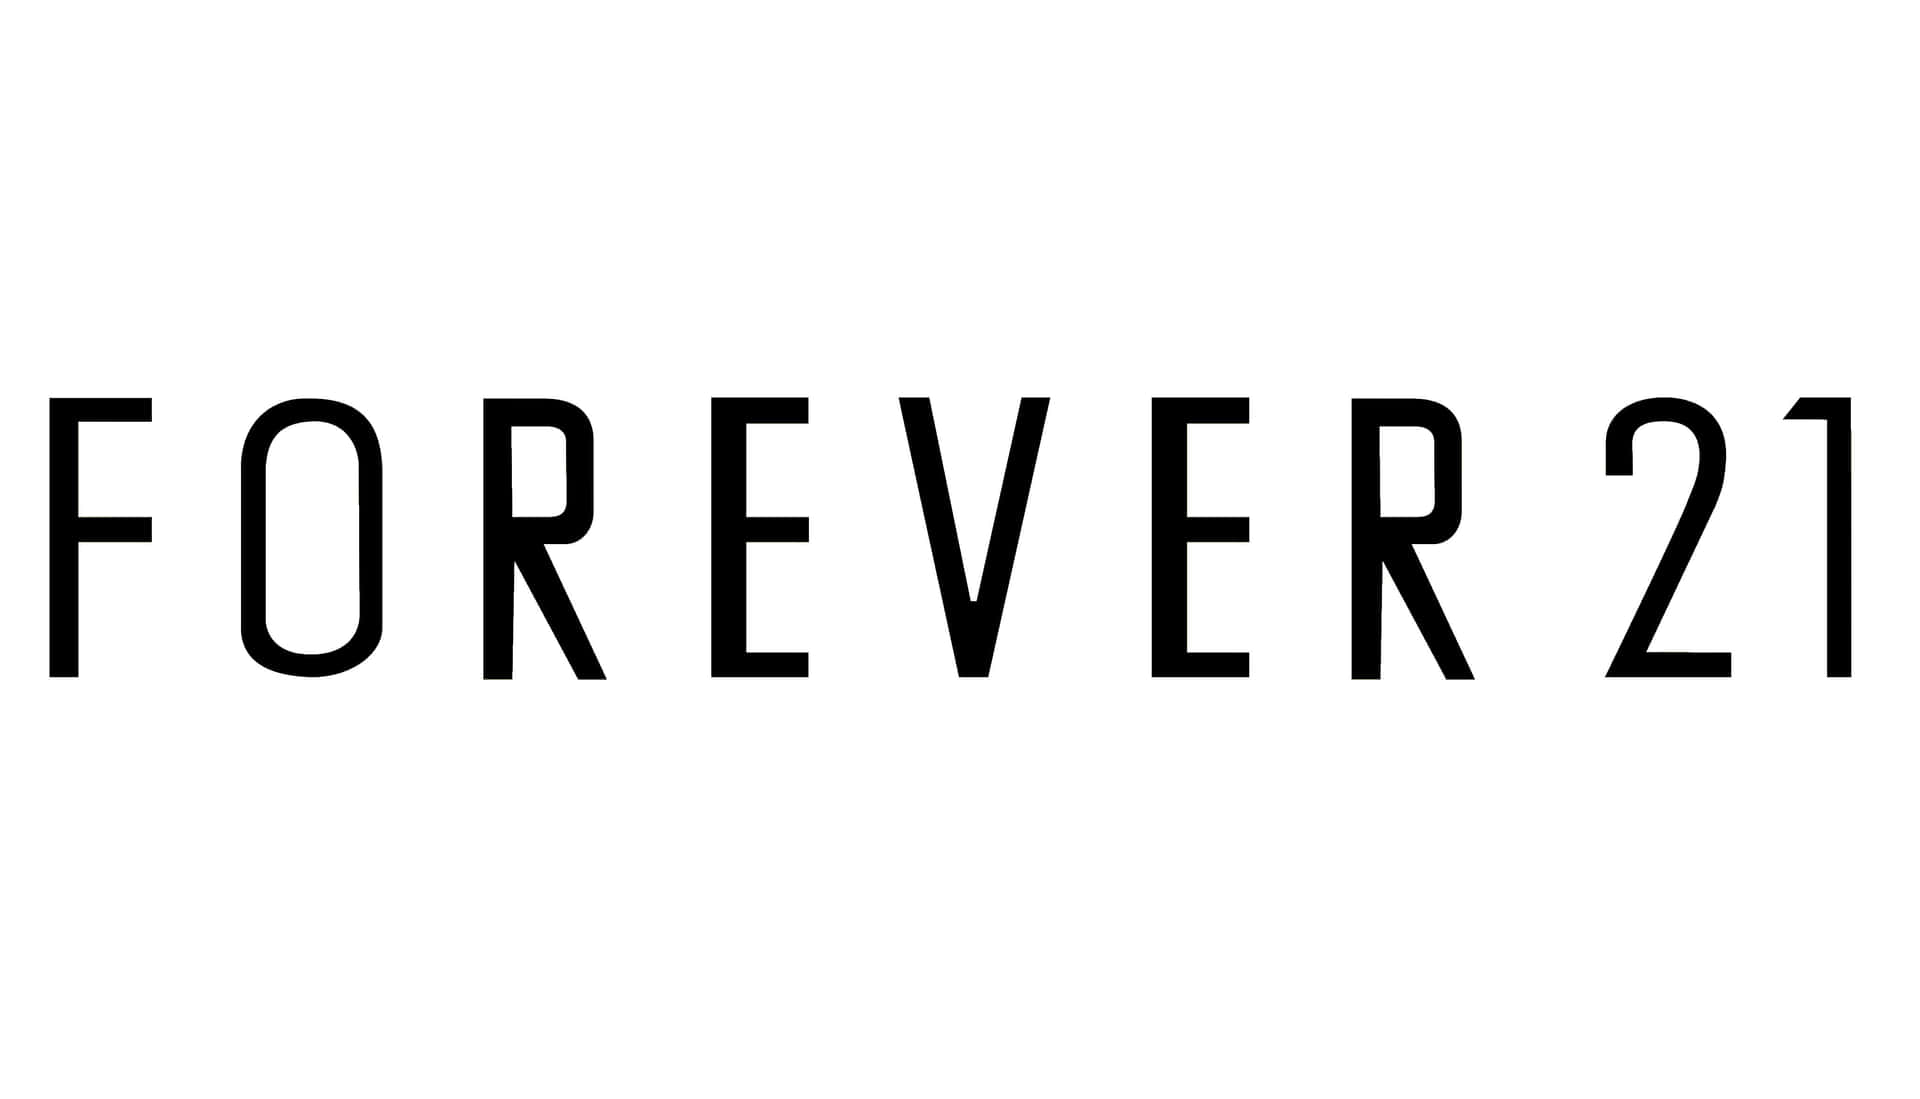 Look fabulous in Forever 21!